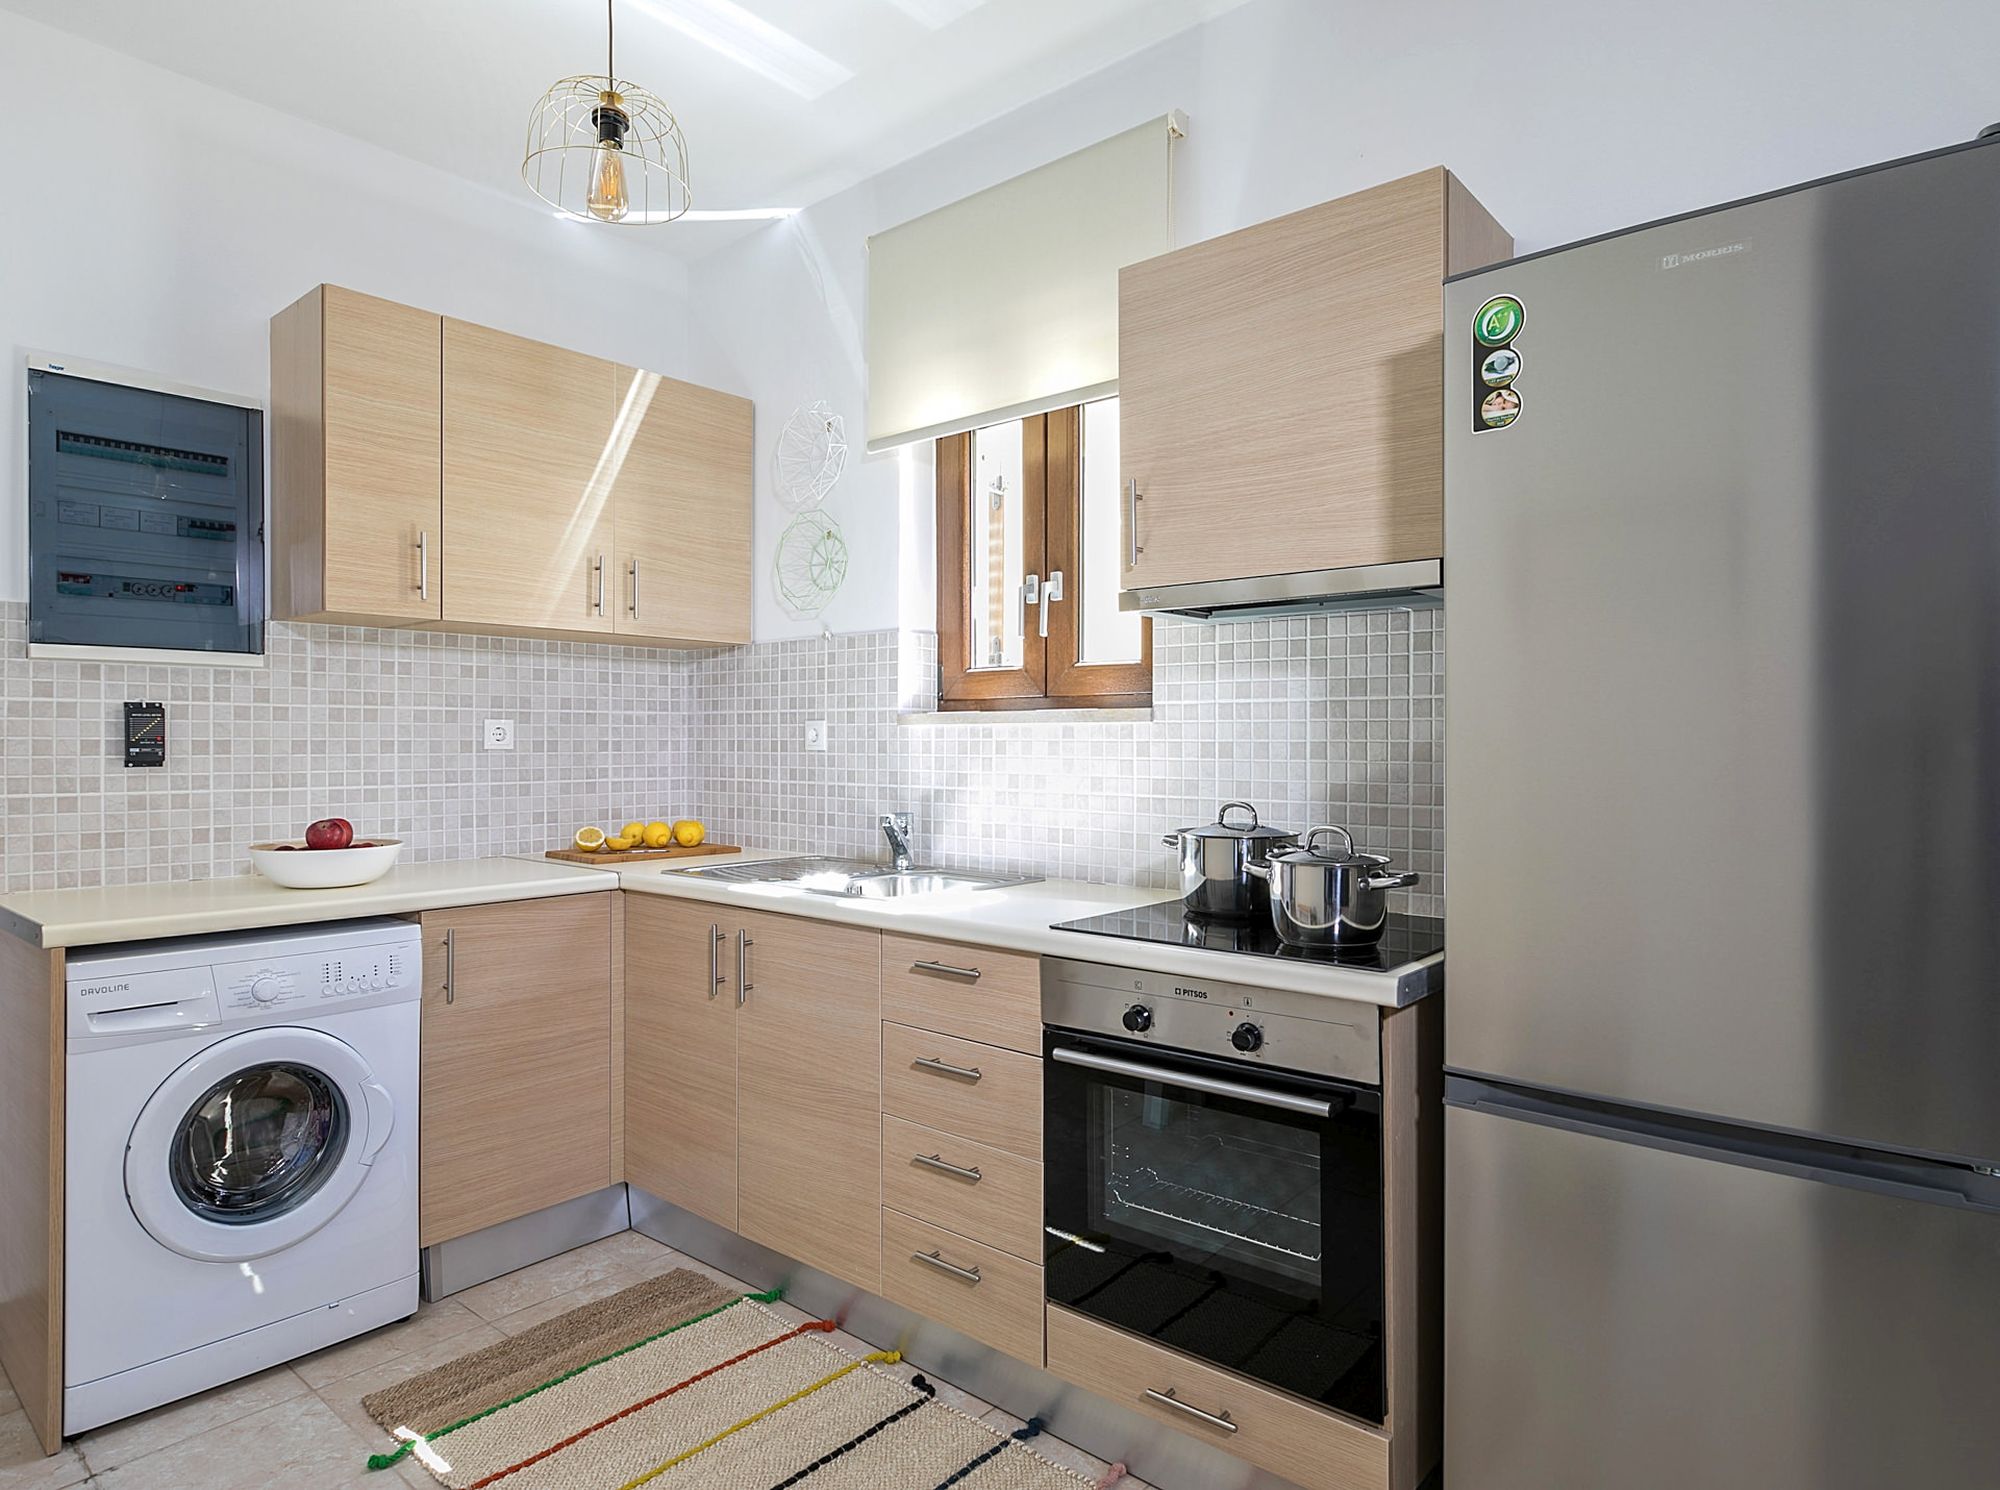 Fully equipped kitchen with an inox big fridge, an electric cooker oven and a washing machine.